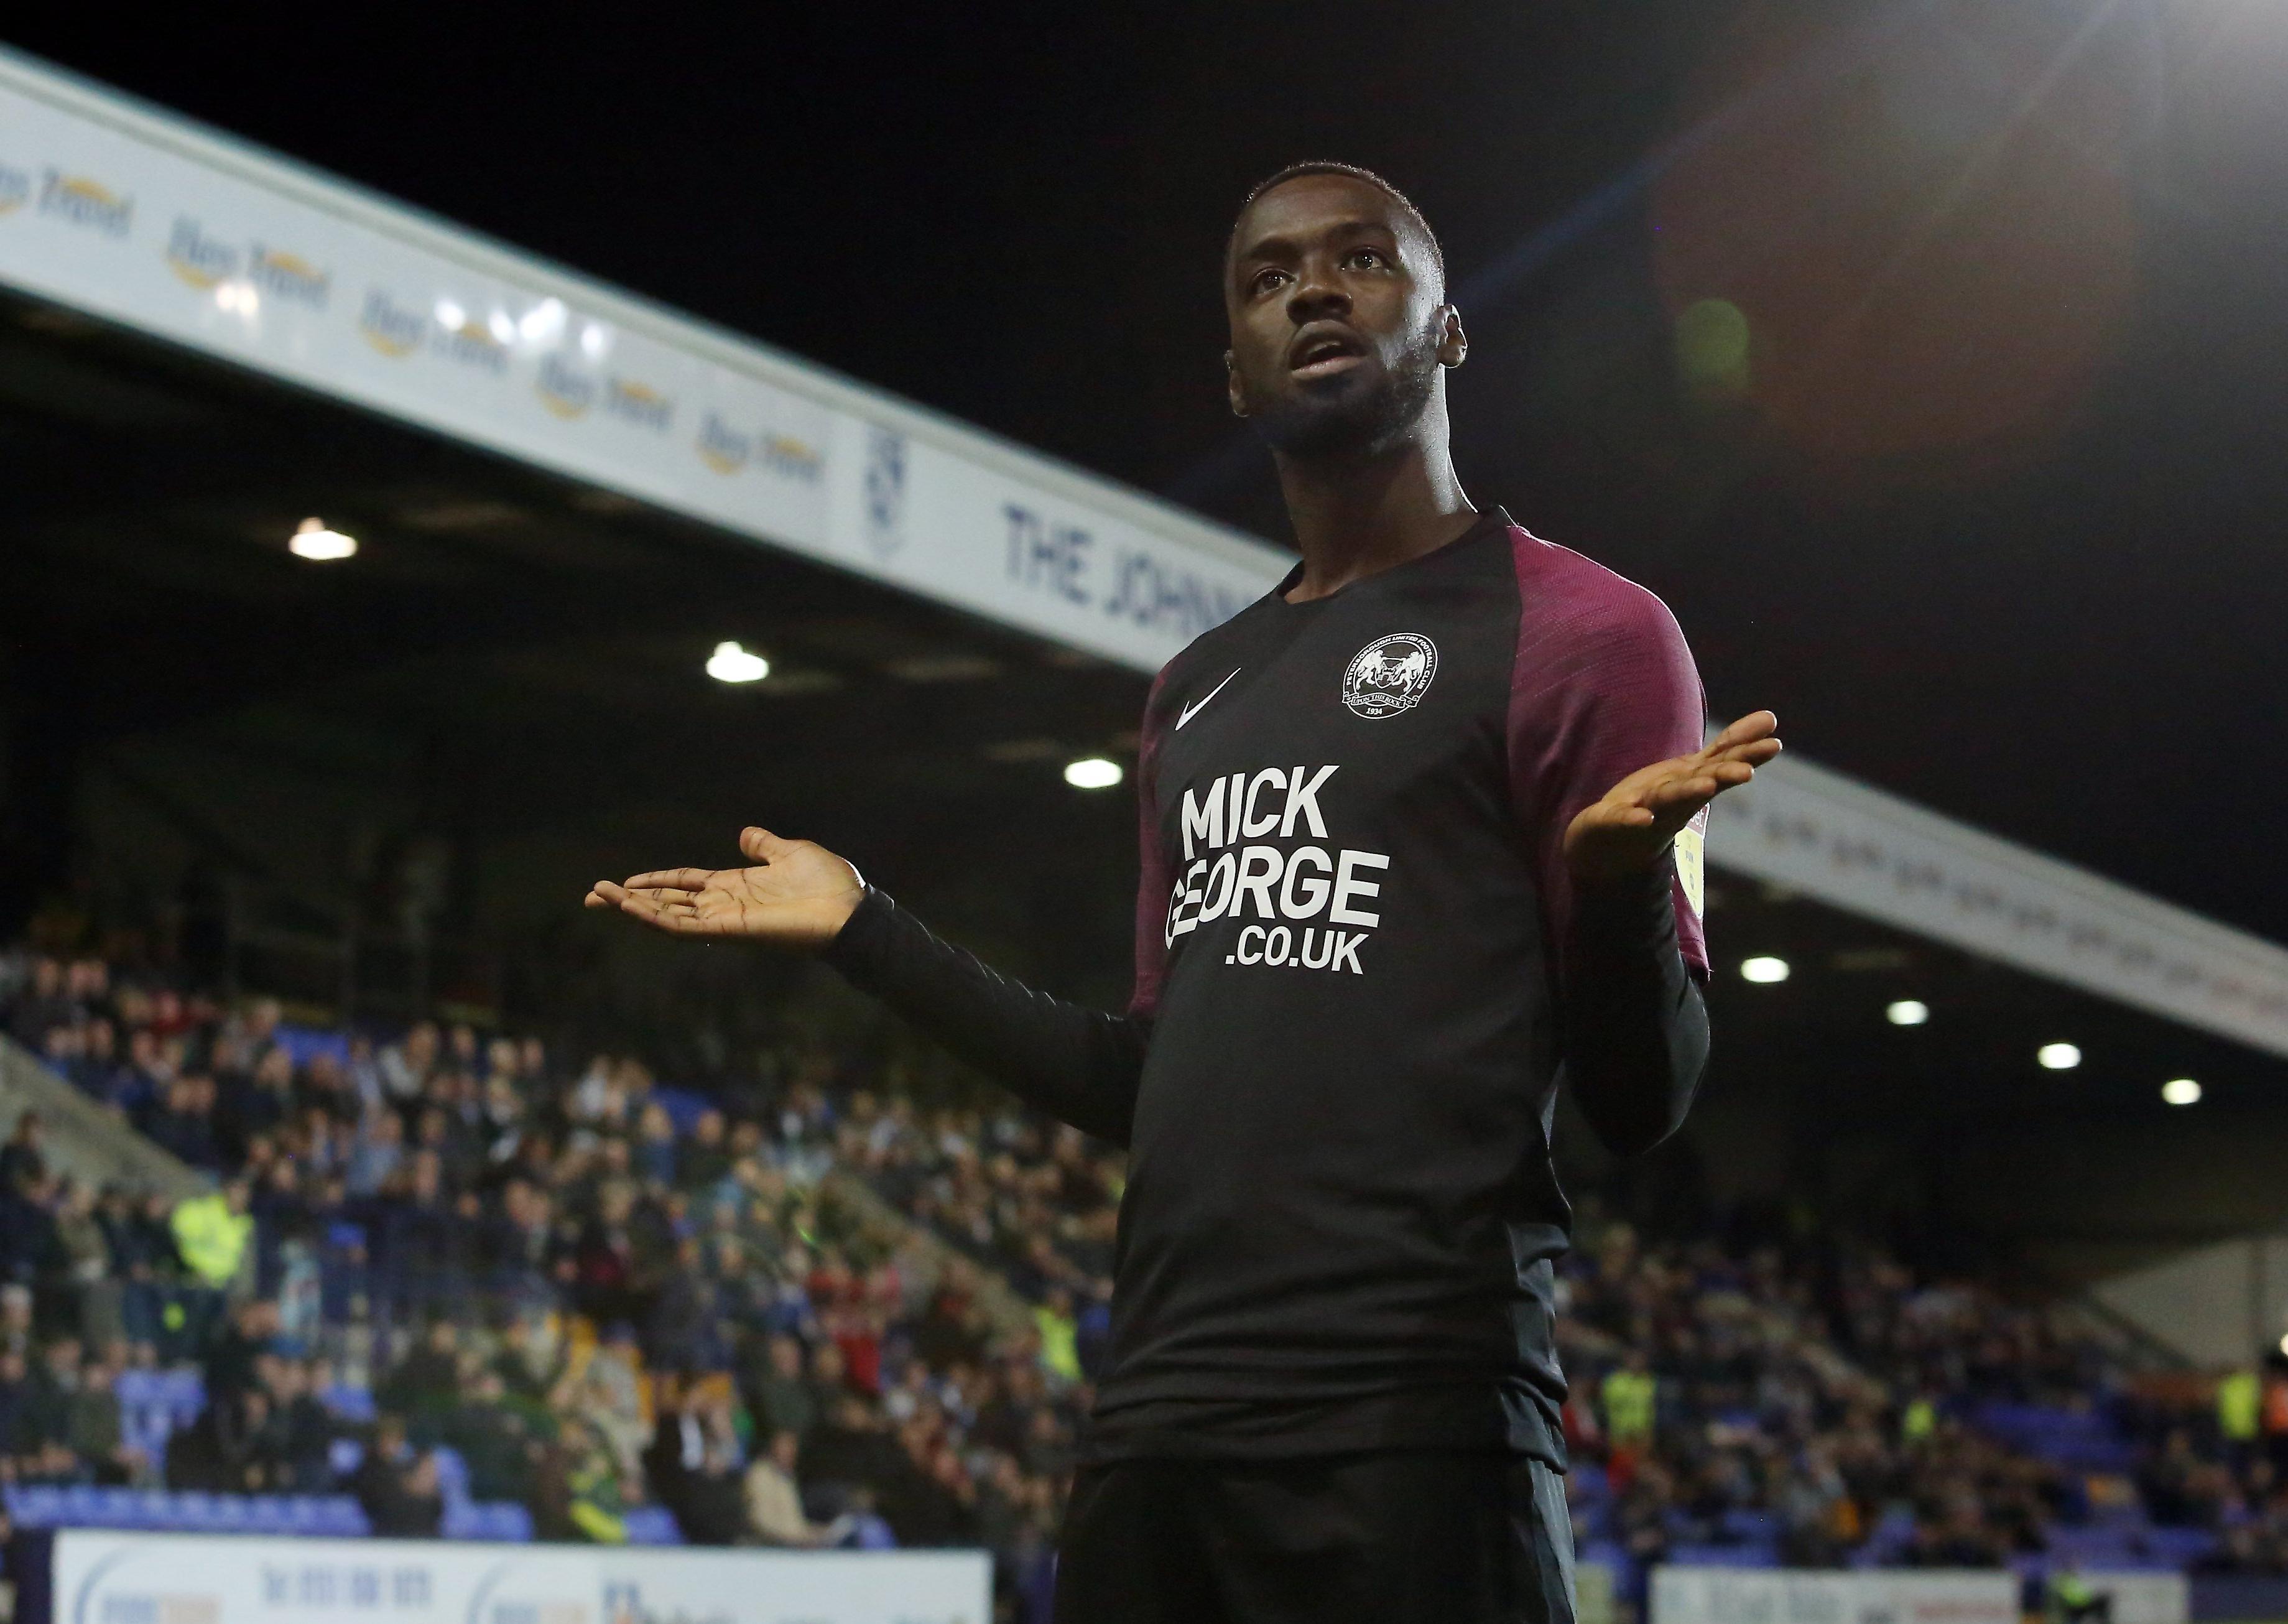 Posh splashed out a club record transfer fee of around £1.3 million to bring striker Mo Eisa to London Road from Cheltenham. He hadn't scored a goal for 15 months, but he has been a Posh hit so far this season.